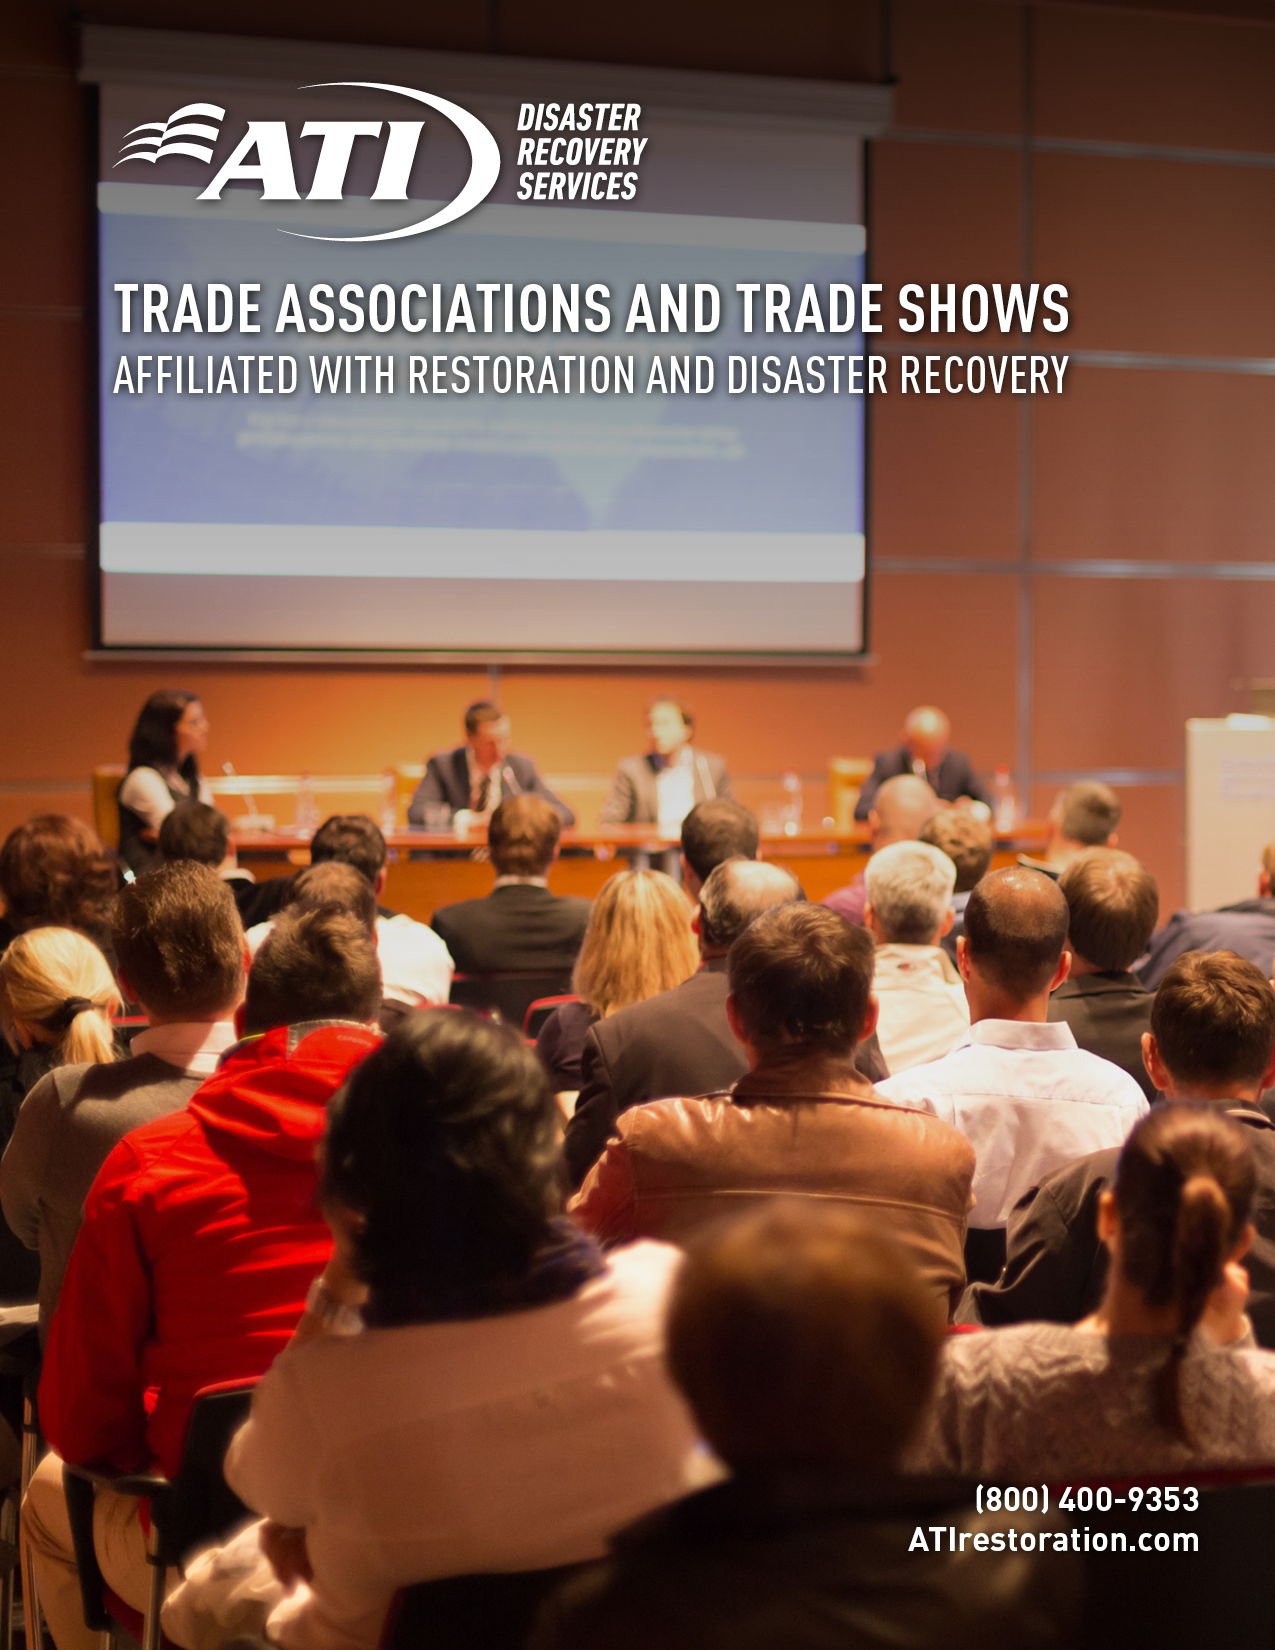 Trade Associations and Trade Shows Affiliated with Restoration and Disaster Recovery